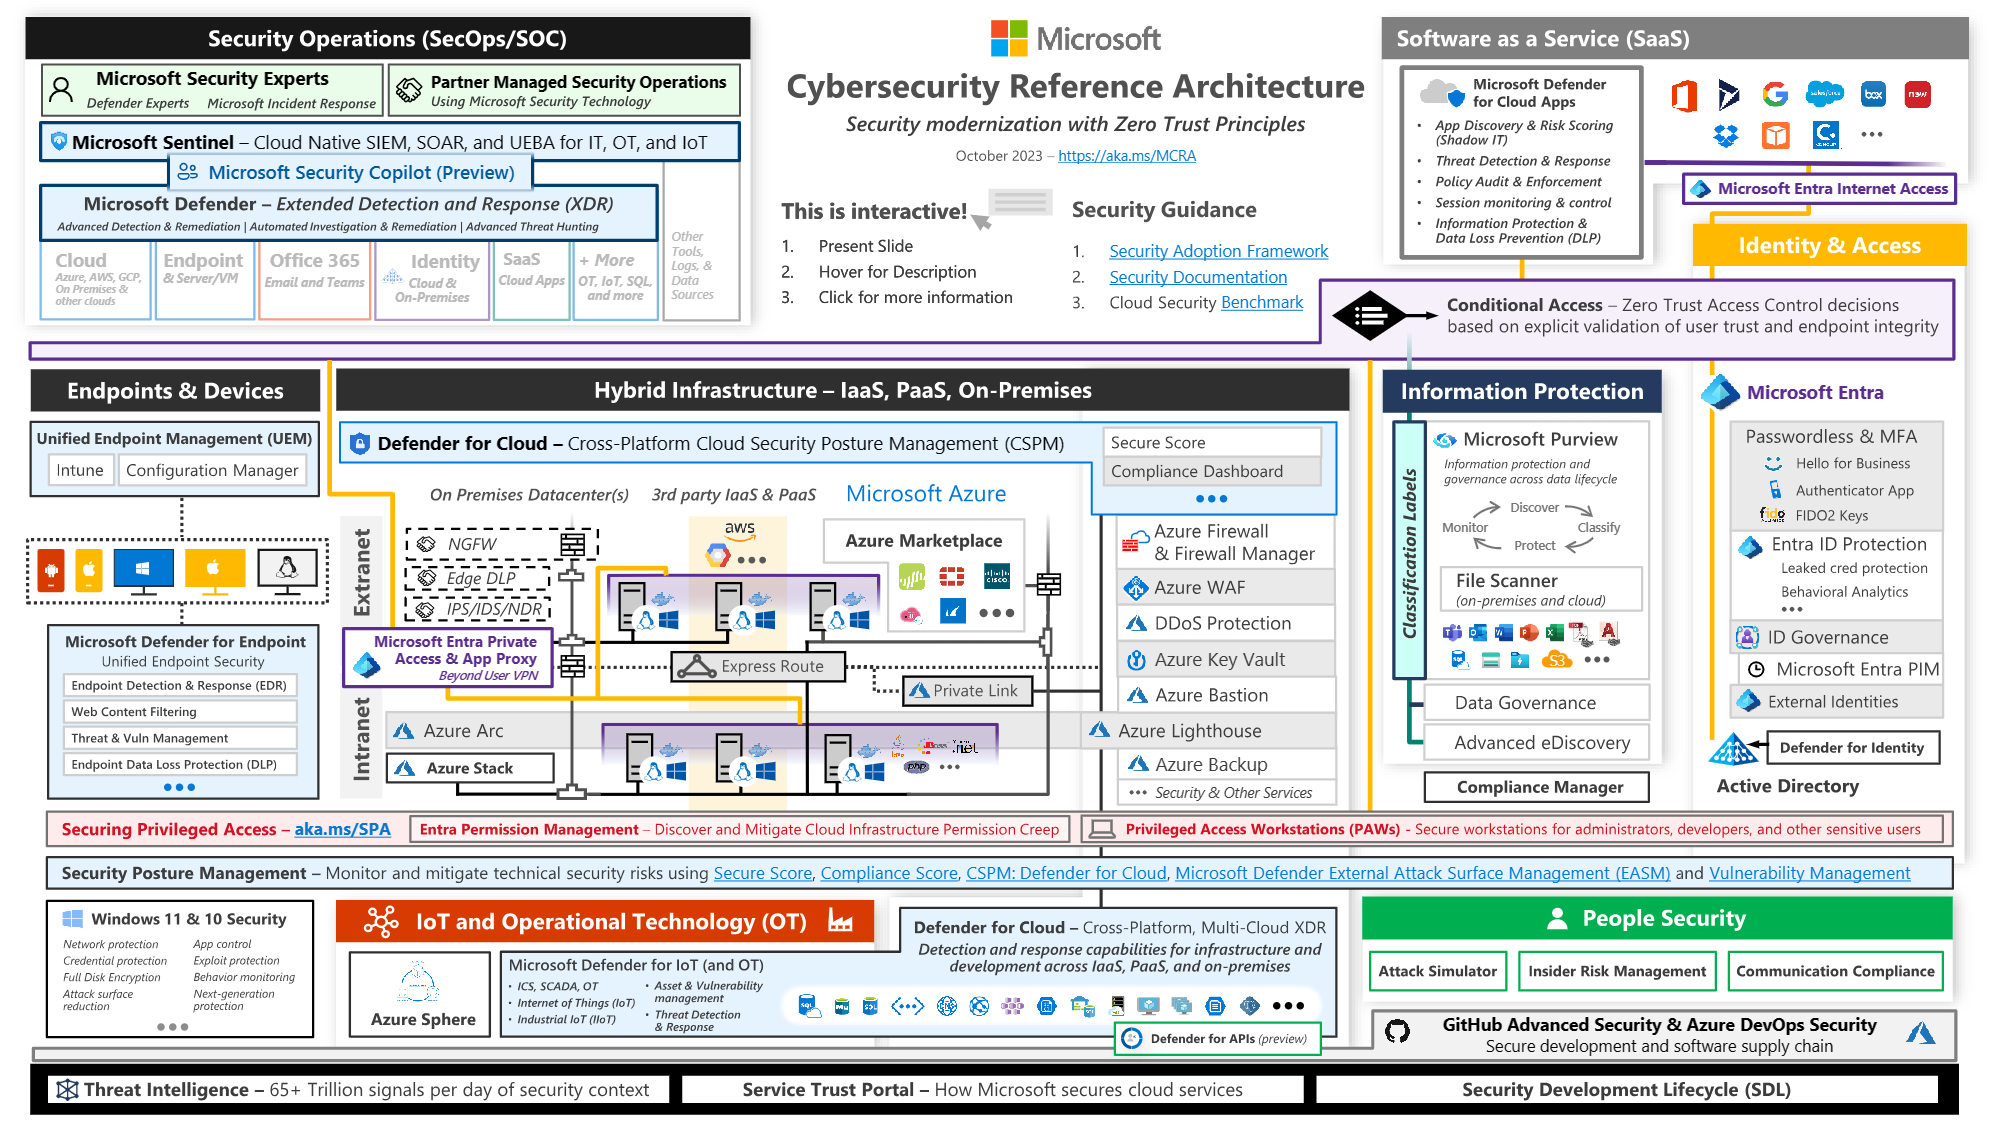 Cybersecurity Reference Architecture